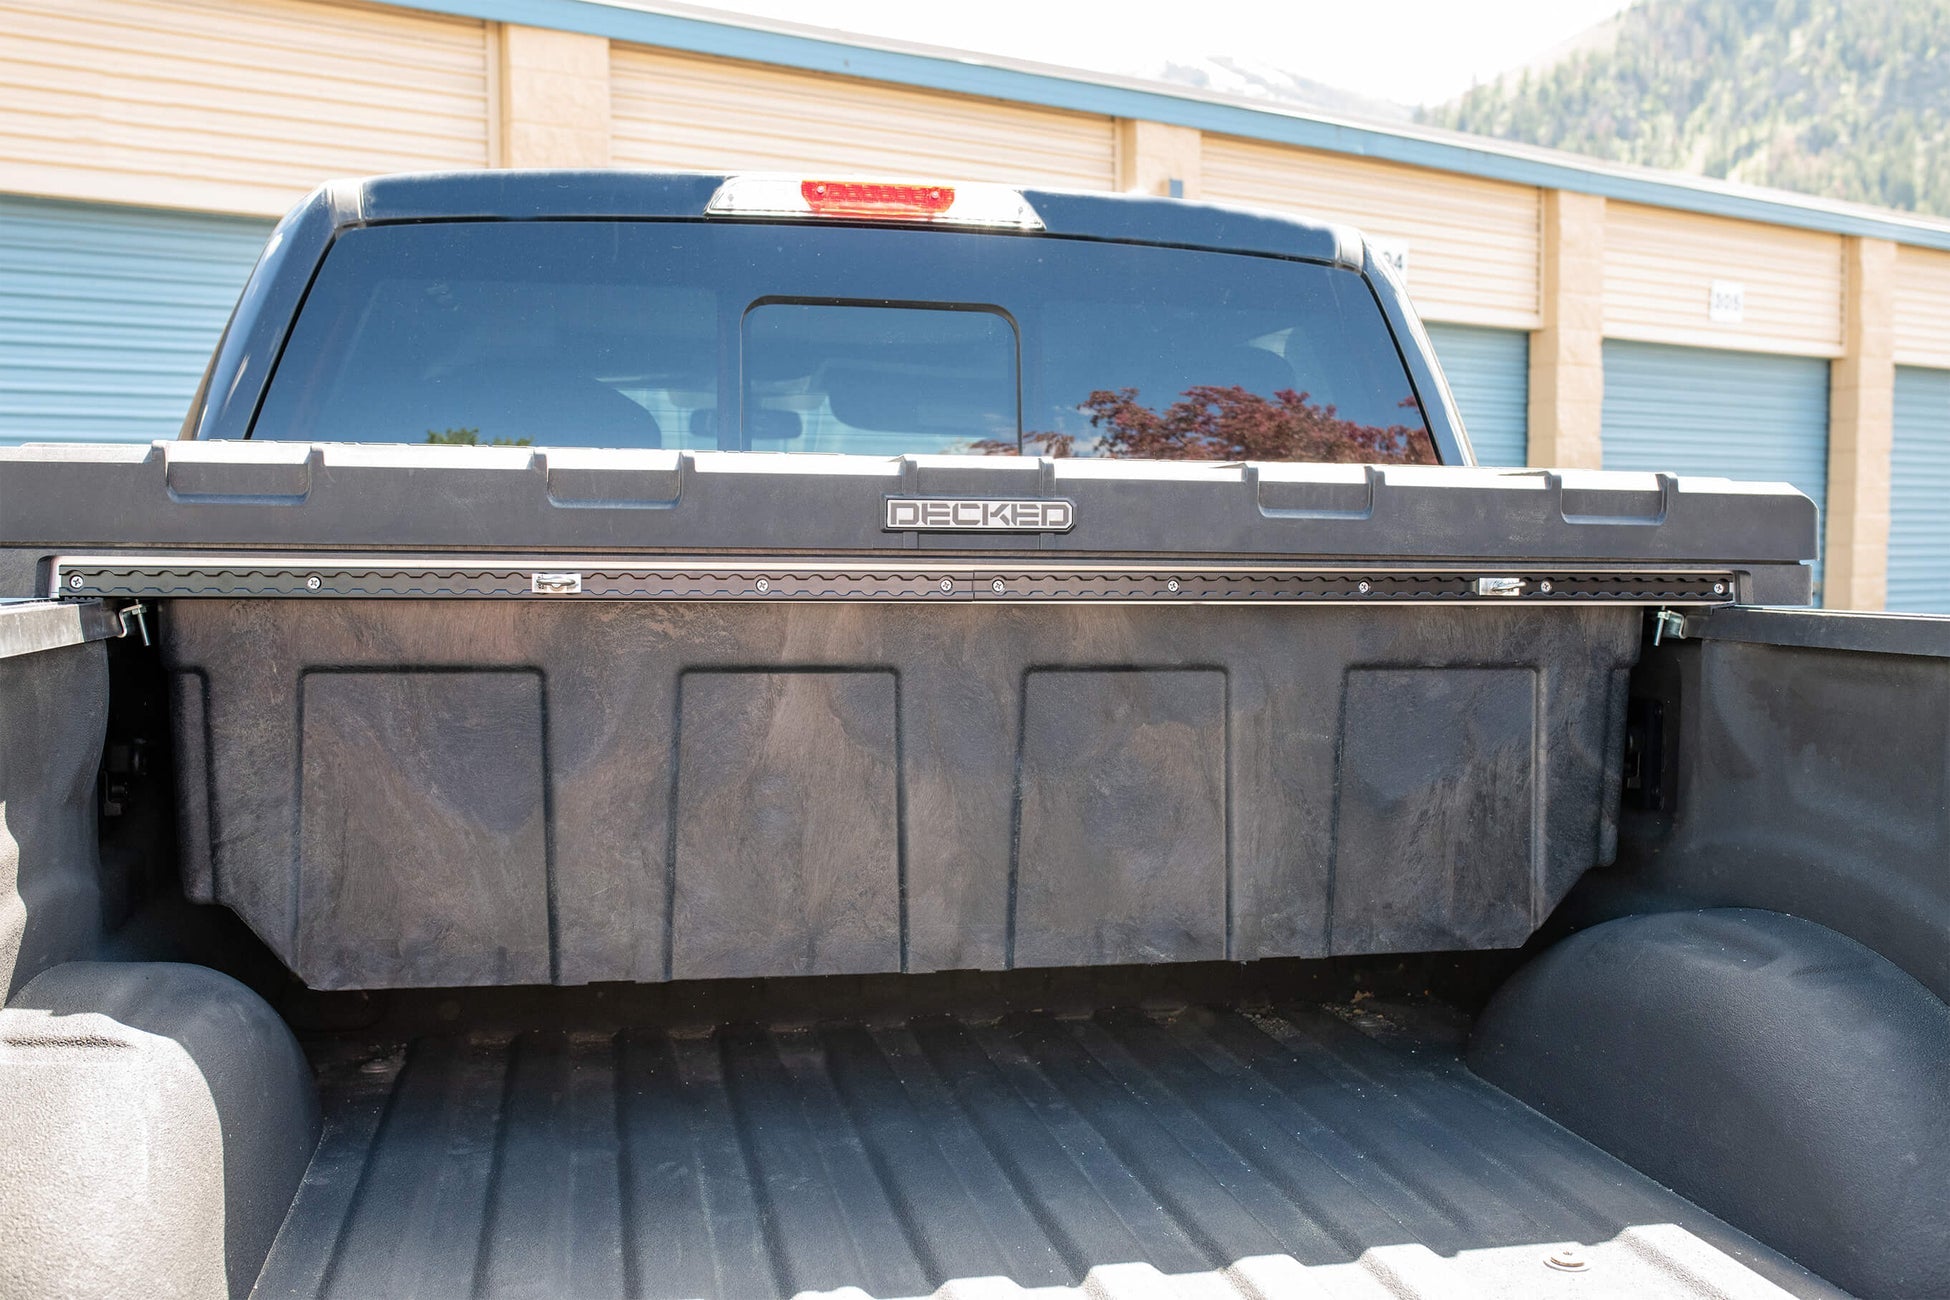 DECKED ATB4 Tool Box Core Trax - two pieces and two load locks